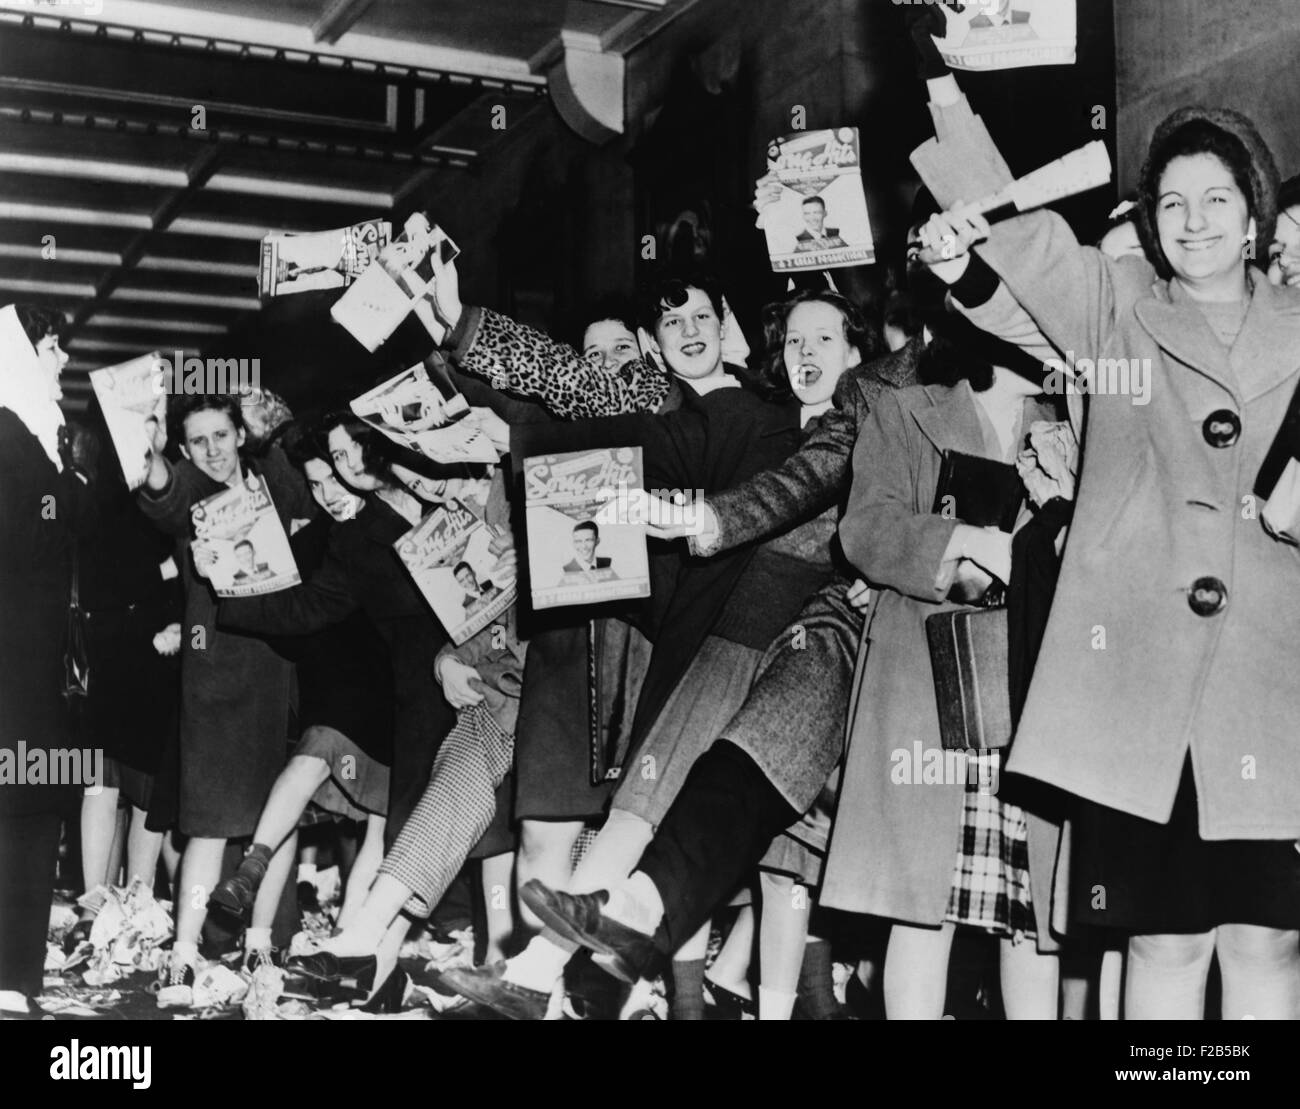 Teenage girls waiting for singer Frank Sinatra to arrive at the Paramount Theatre. 1945 in New York City. - (BSLOC_2014_17_78) Stock Photo